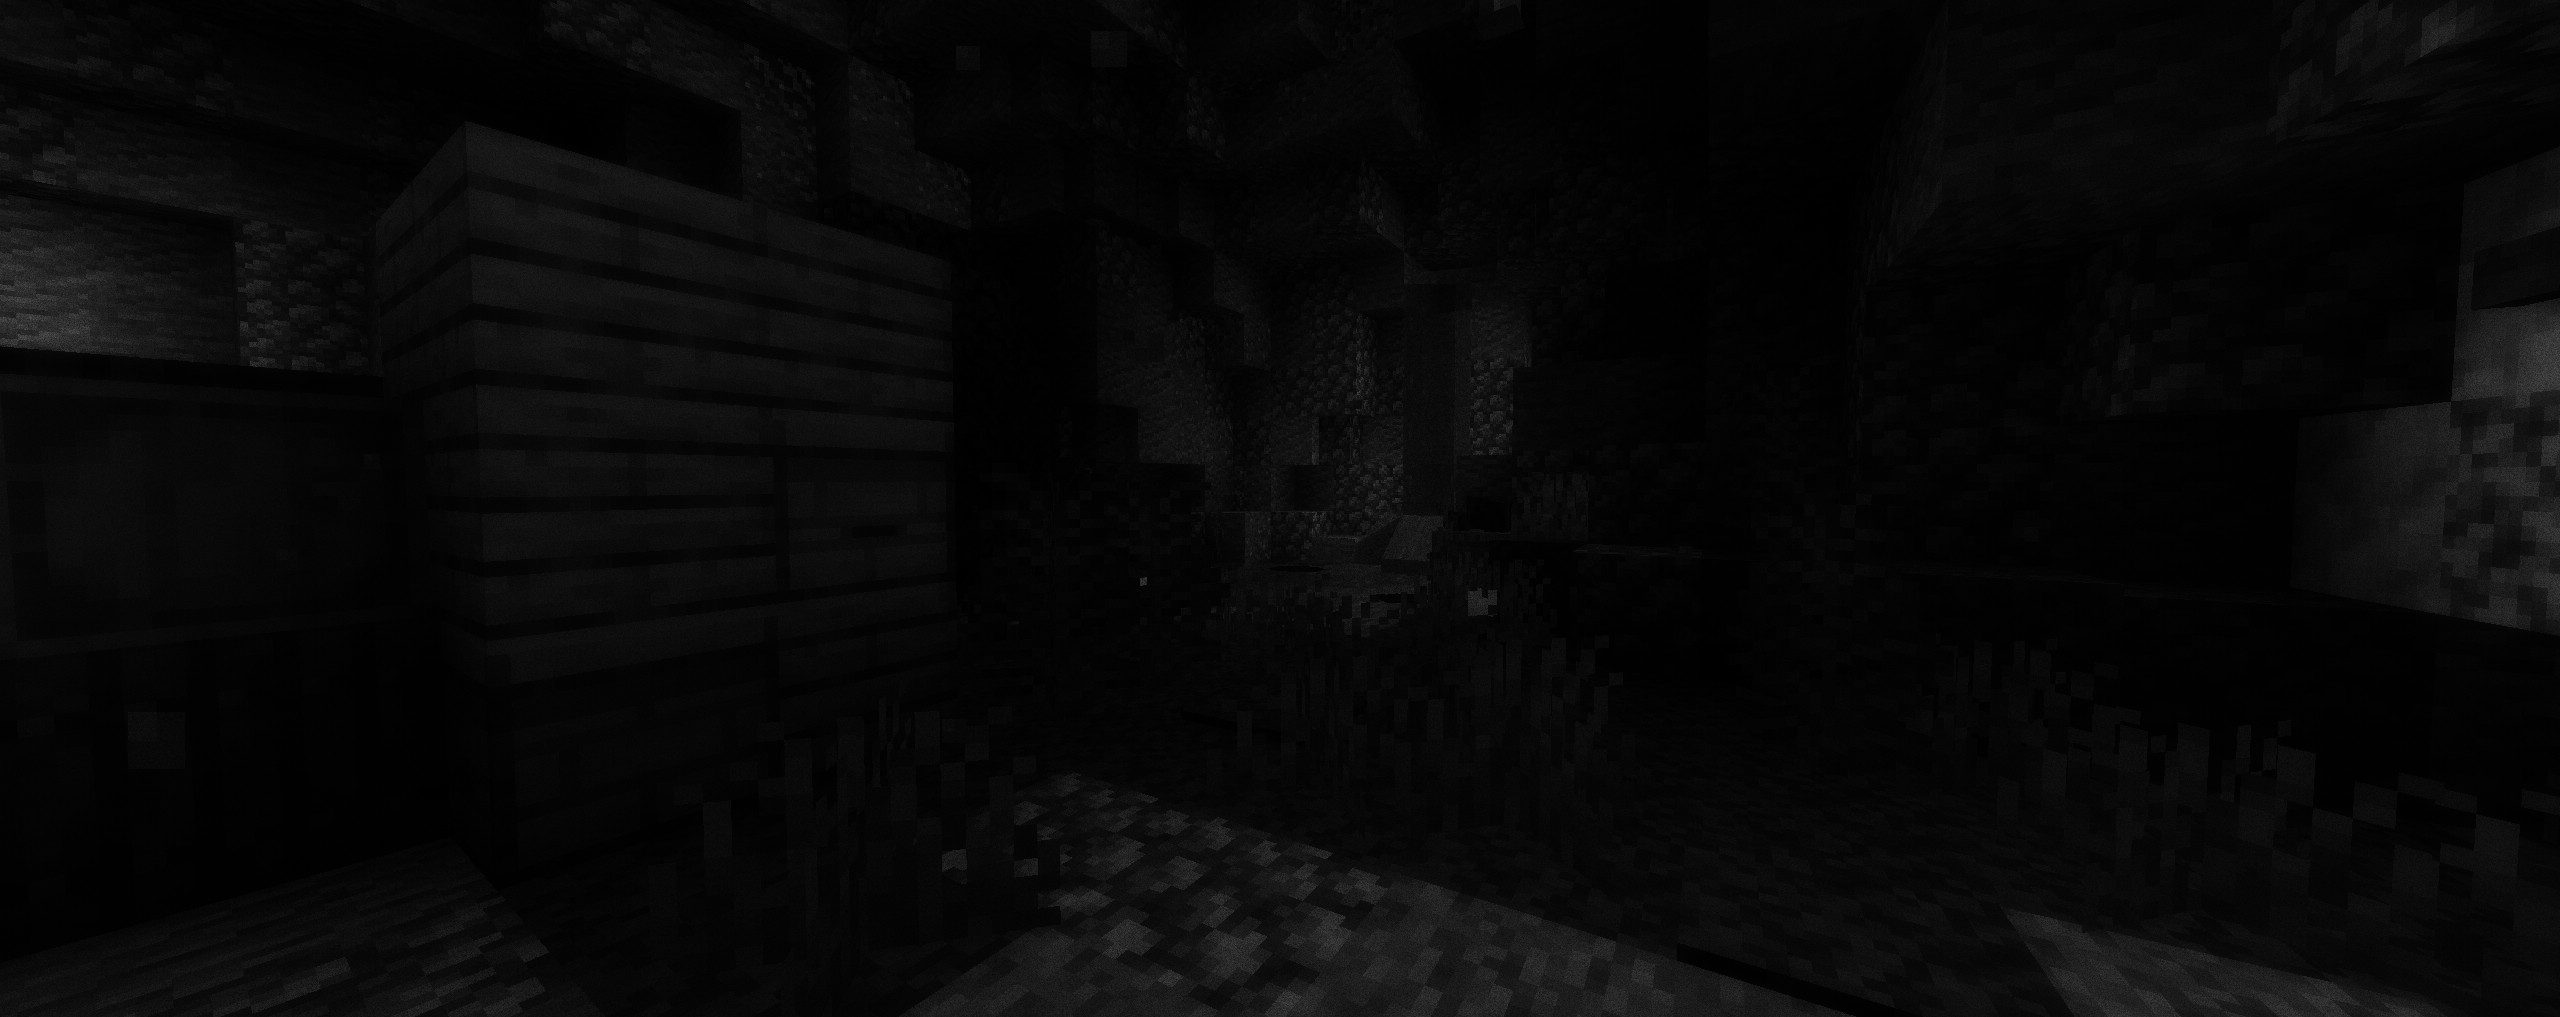 Lymbo Shaders (1.20.4, 1.19.4) - Gray World, Ghostly Covering 6